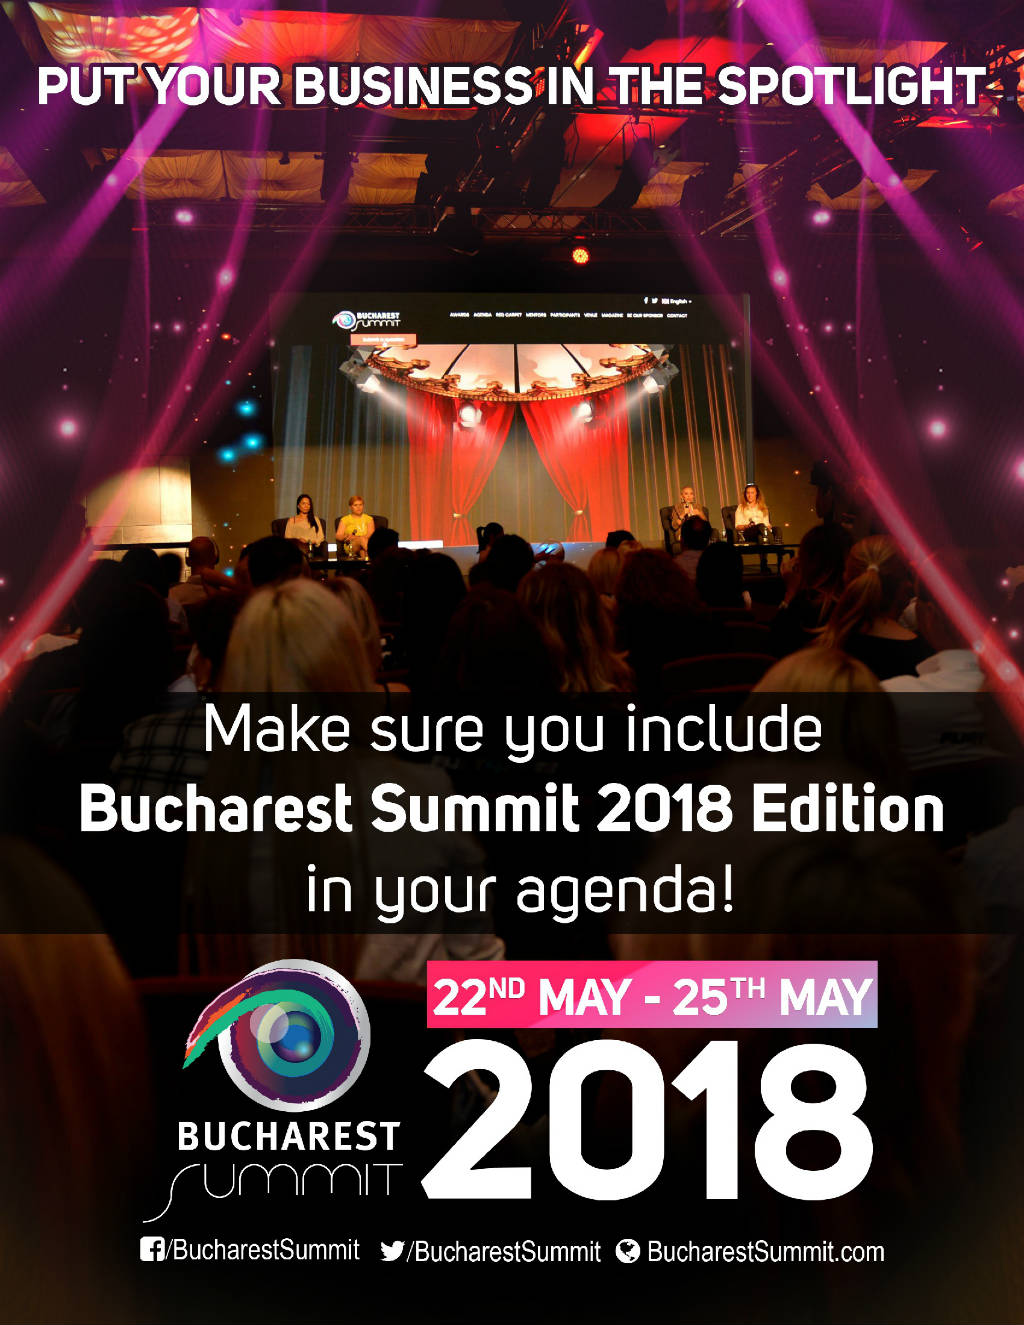 Full Poster ad for Bucharest Summit 2018.